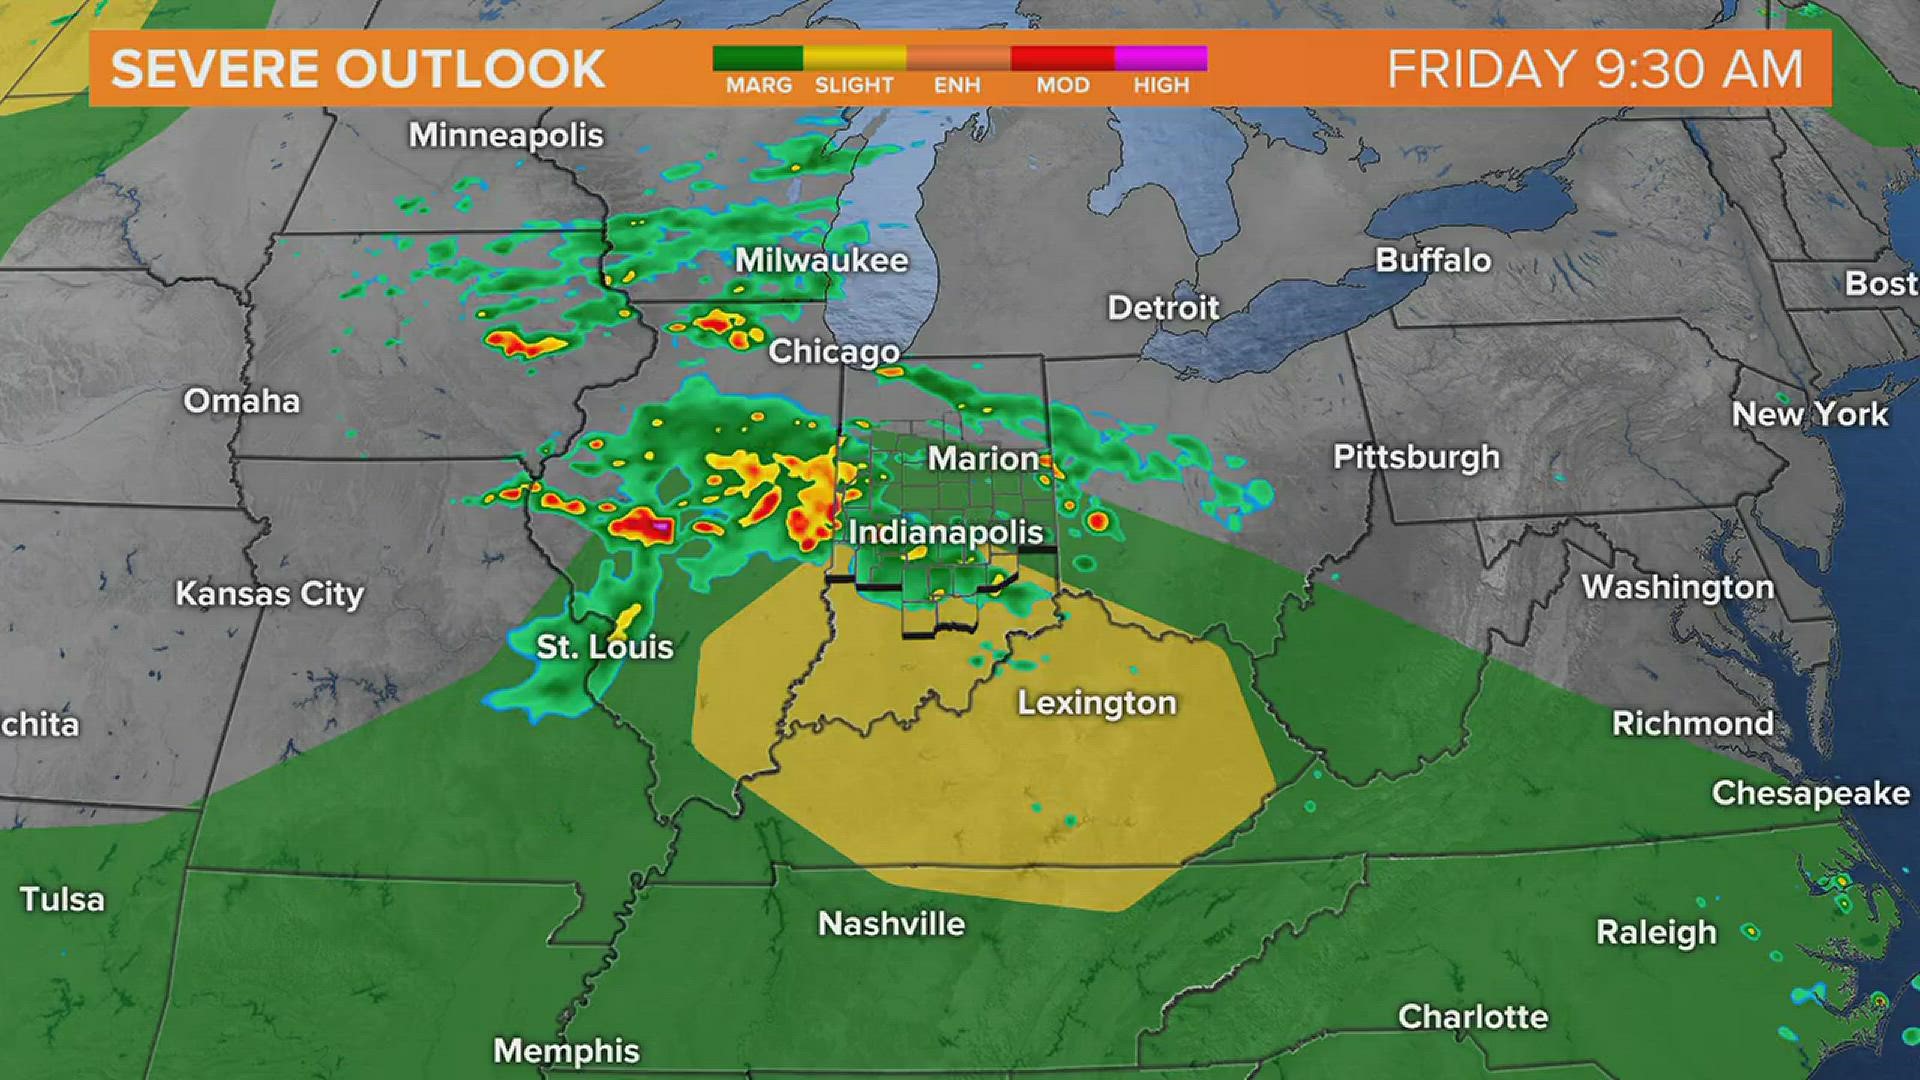 Showers and thunderstorms return today with a risk of severe weather.